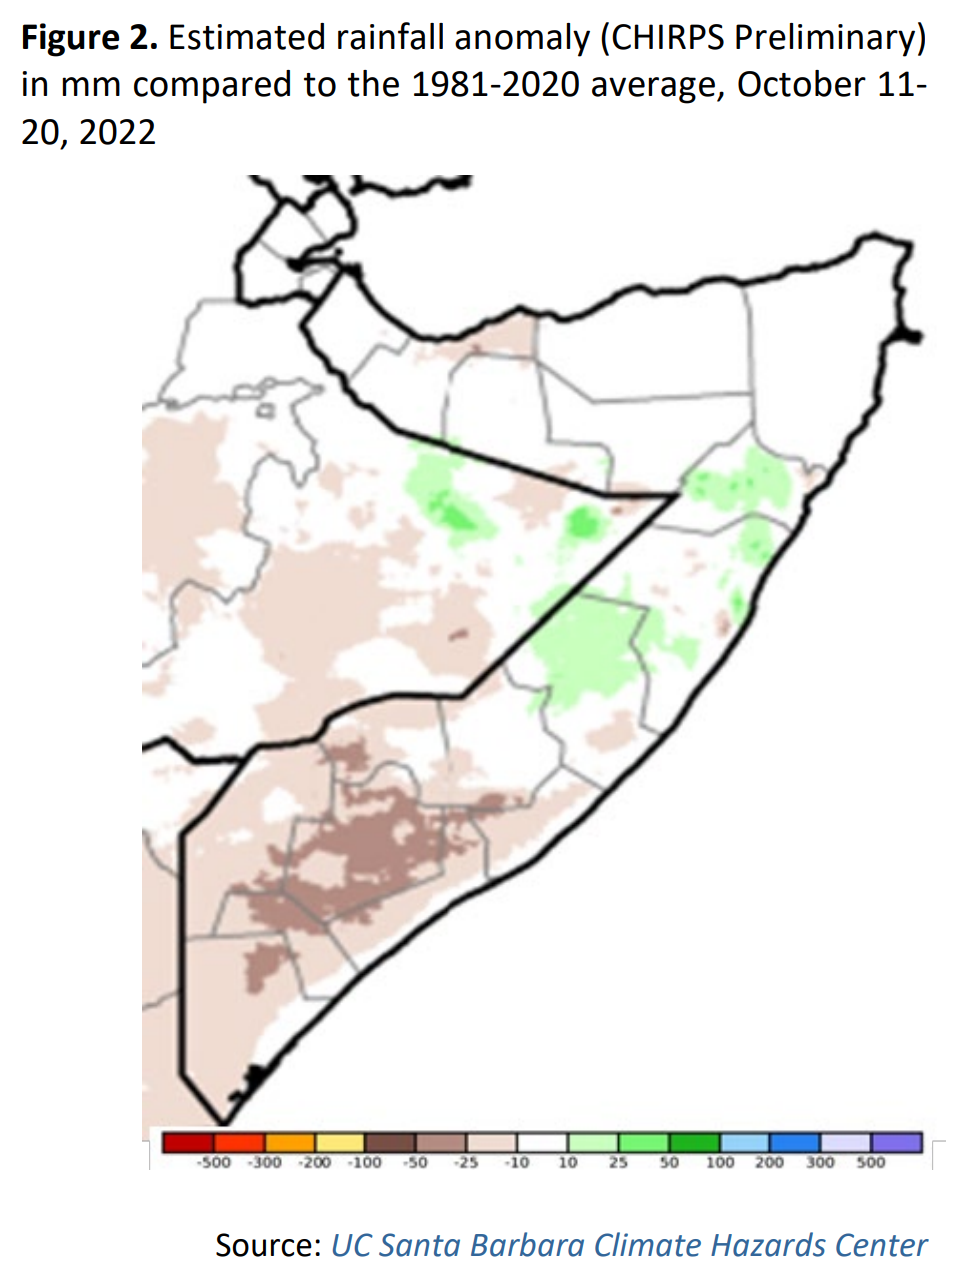 Estimated rainfall anomaly (CHIRPS Preliminary) in mm compared to the 1981-2020 average for Somalia, 11-20 October 2022. Data: UC Santa Barbara Climate Hazards Center. Graphic: FEWS NET